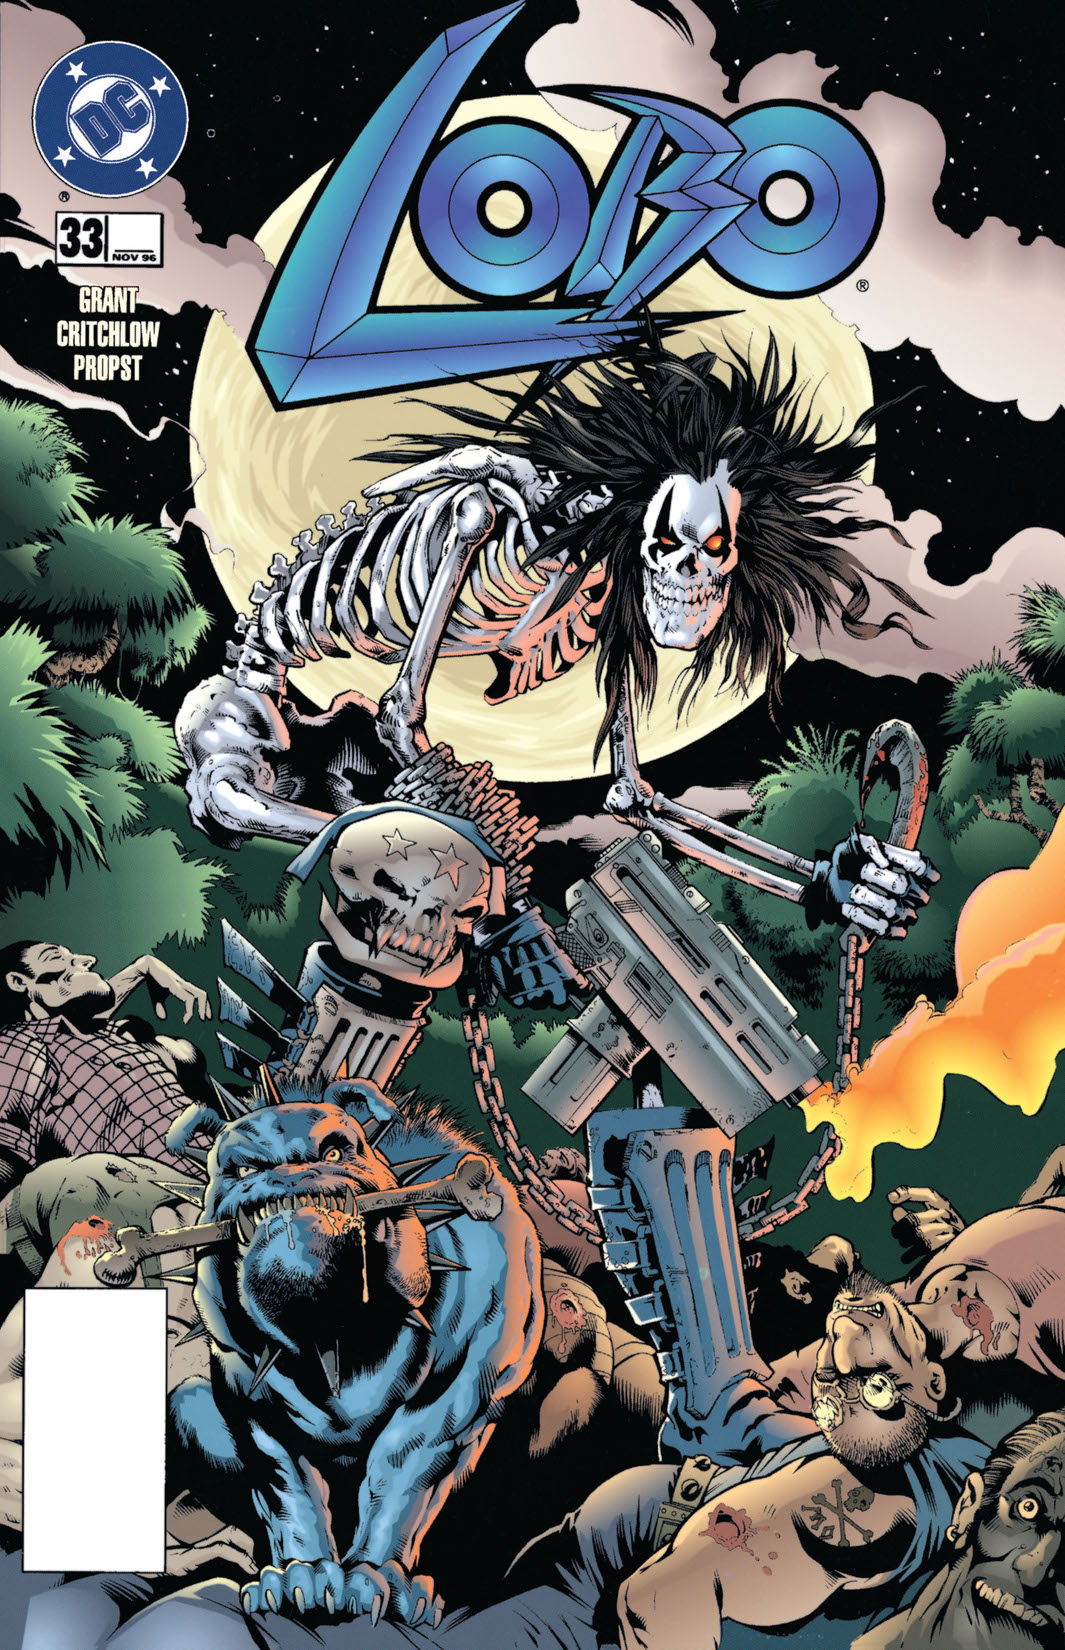 Lobo (1993-1999) #33 preview images